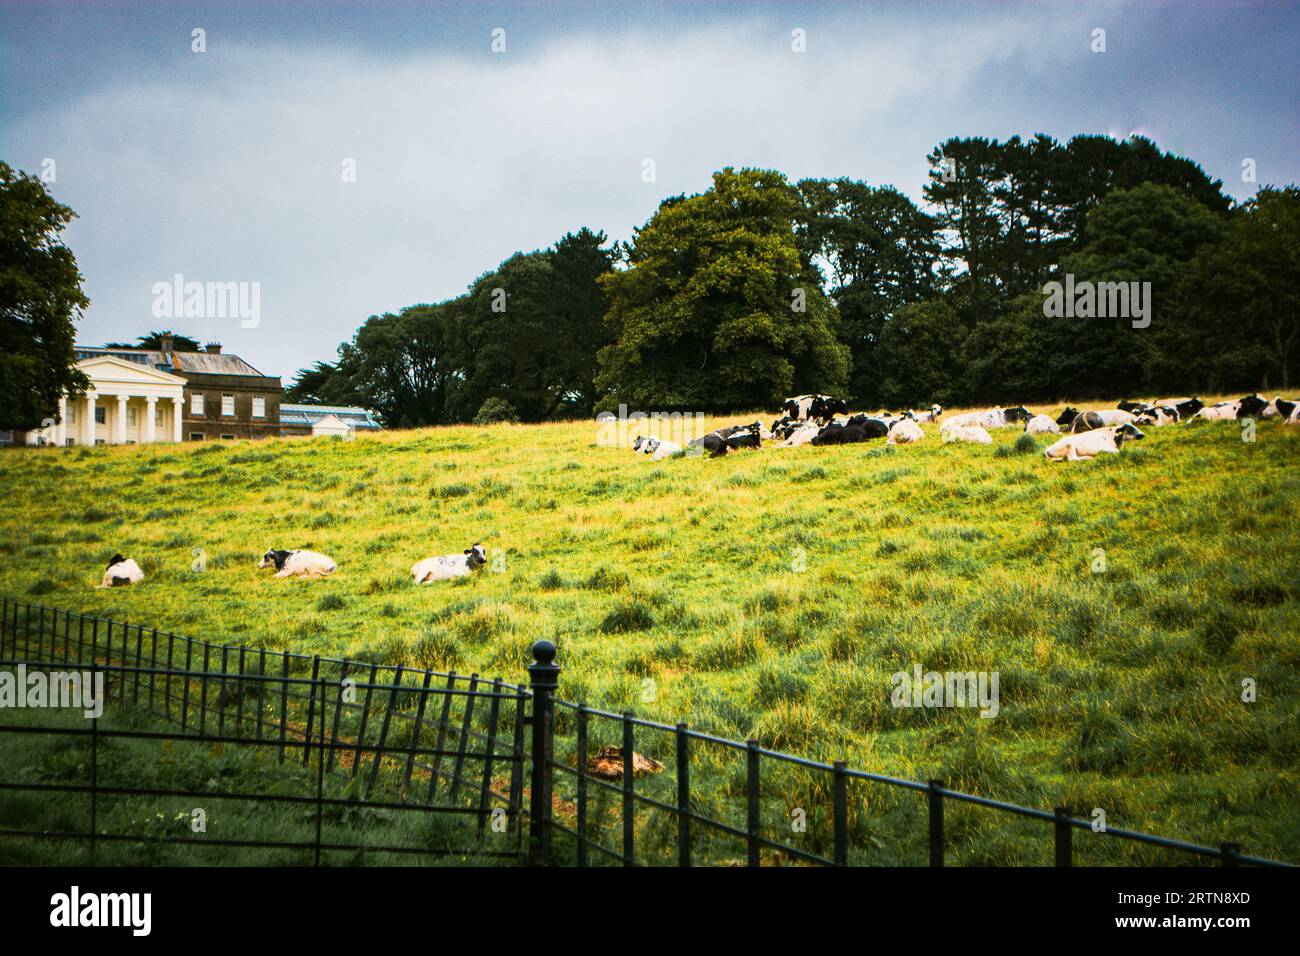 Cows at Trelissick garden of the National trust, cornwall england uk Stock Photo